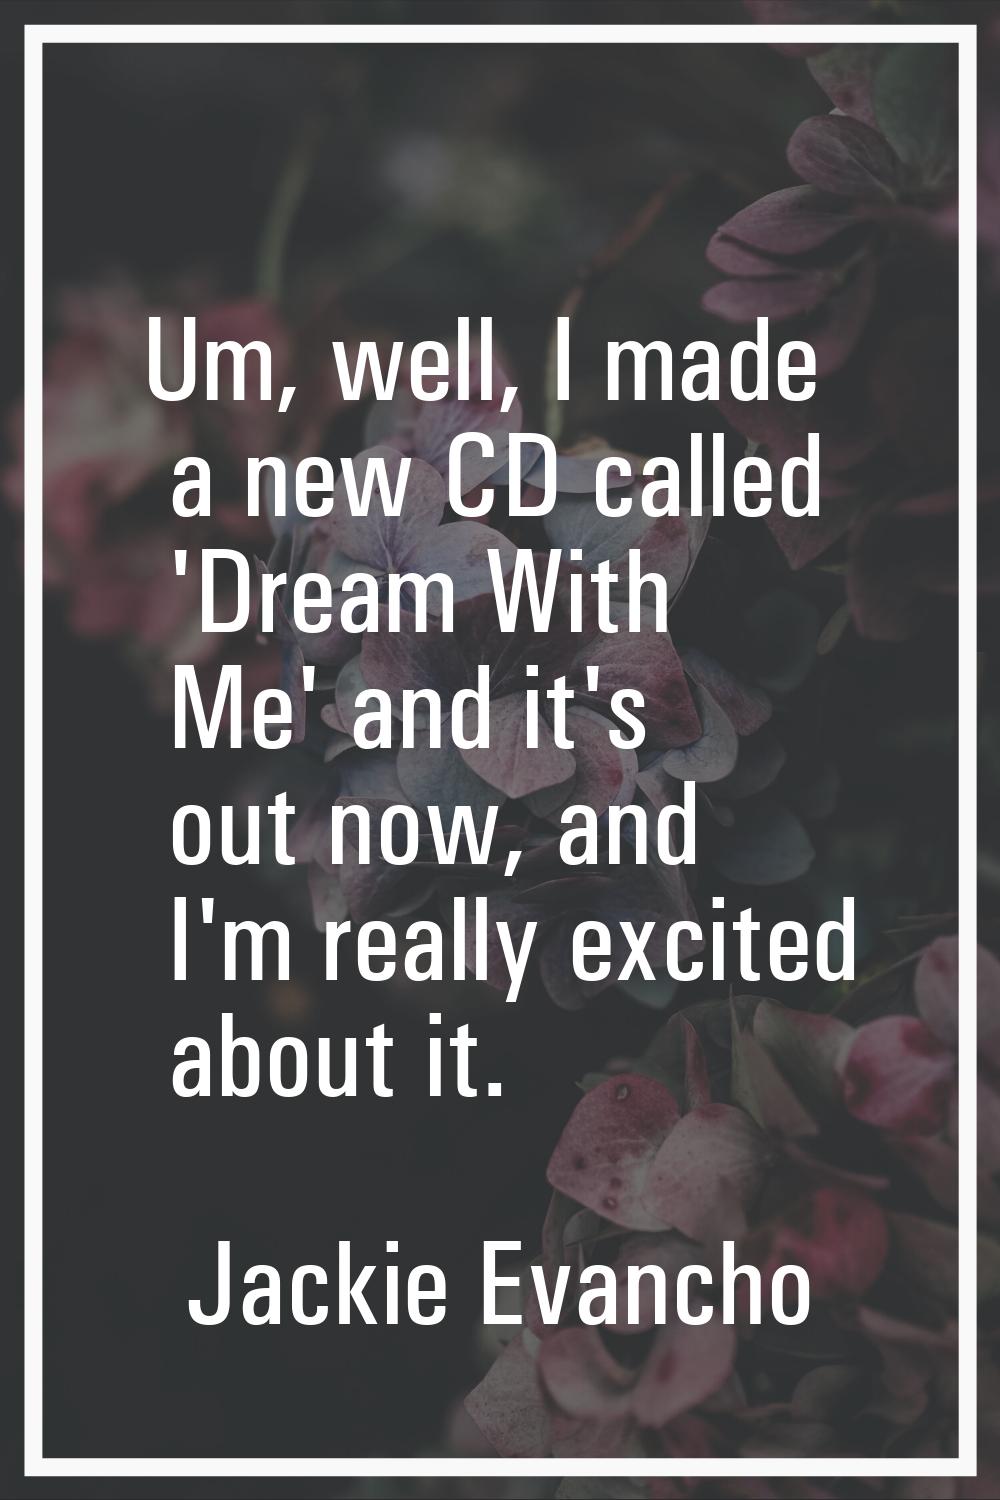 Um, well, I made a new CD called 'Dream With Me' and it's out now, and I'm really excited about it.